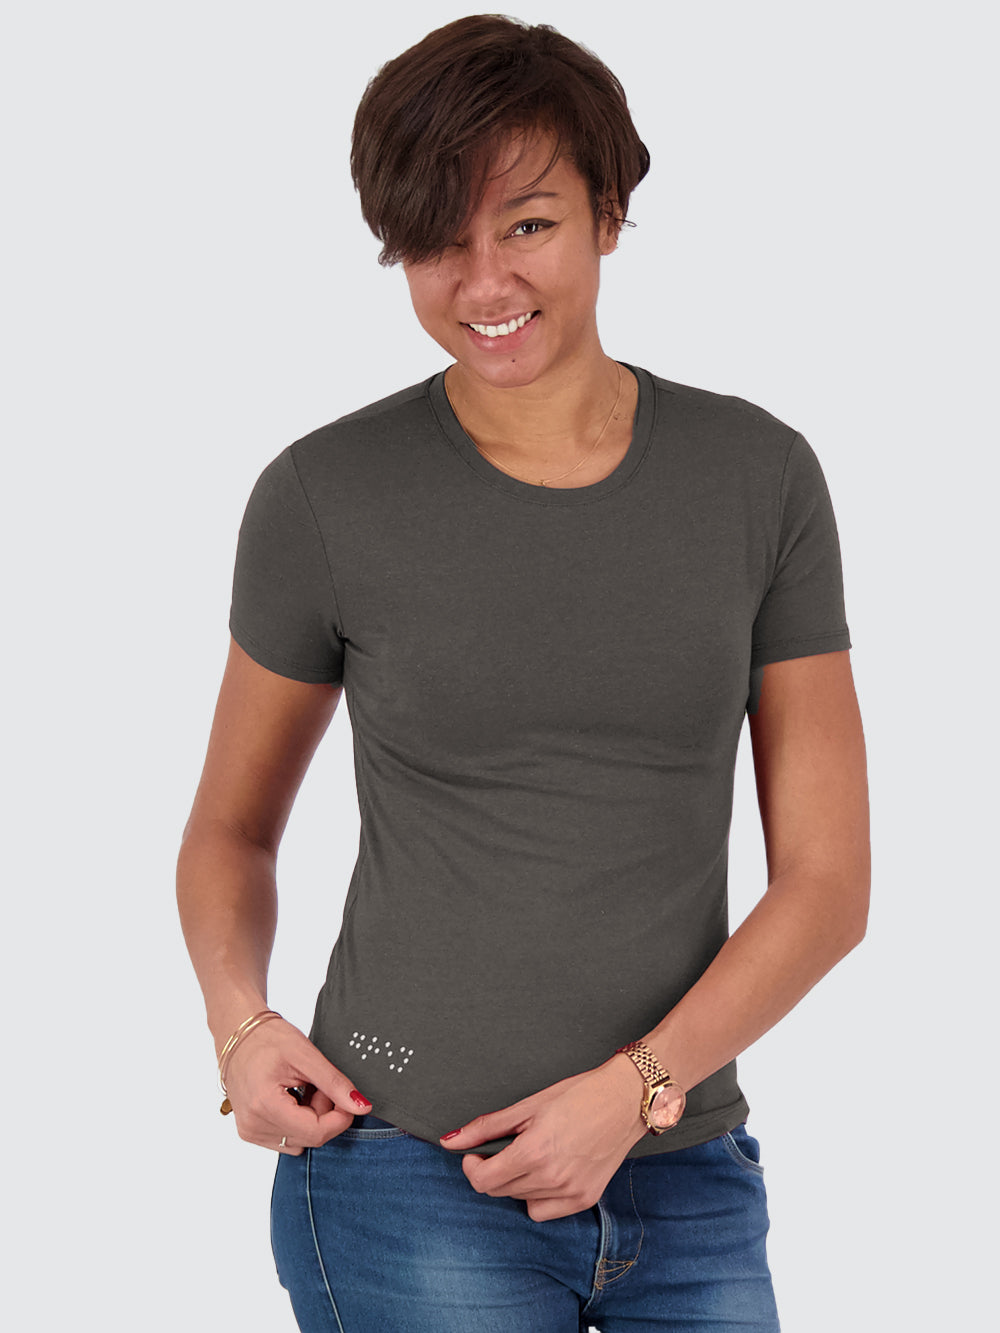 Two Blind Brothers - Womens Women's Short Sleeve Crewneck Graphite-Grey